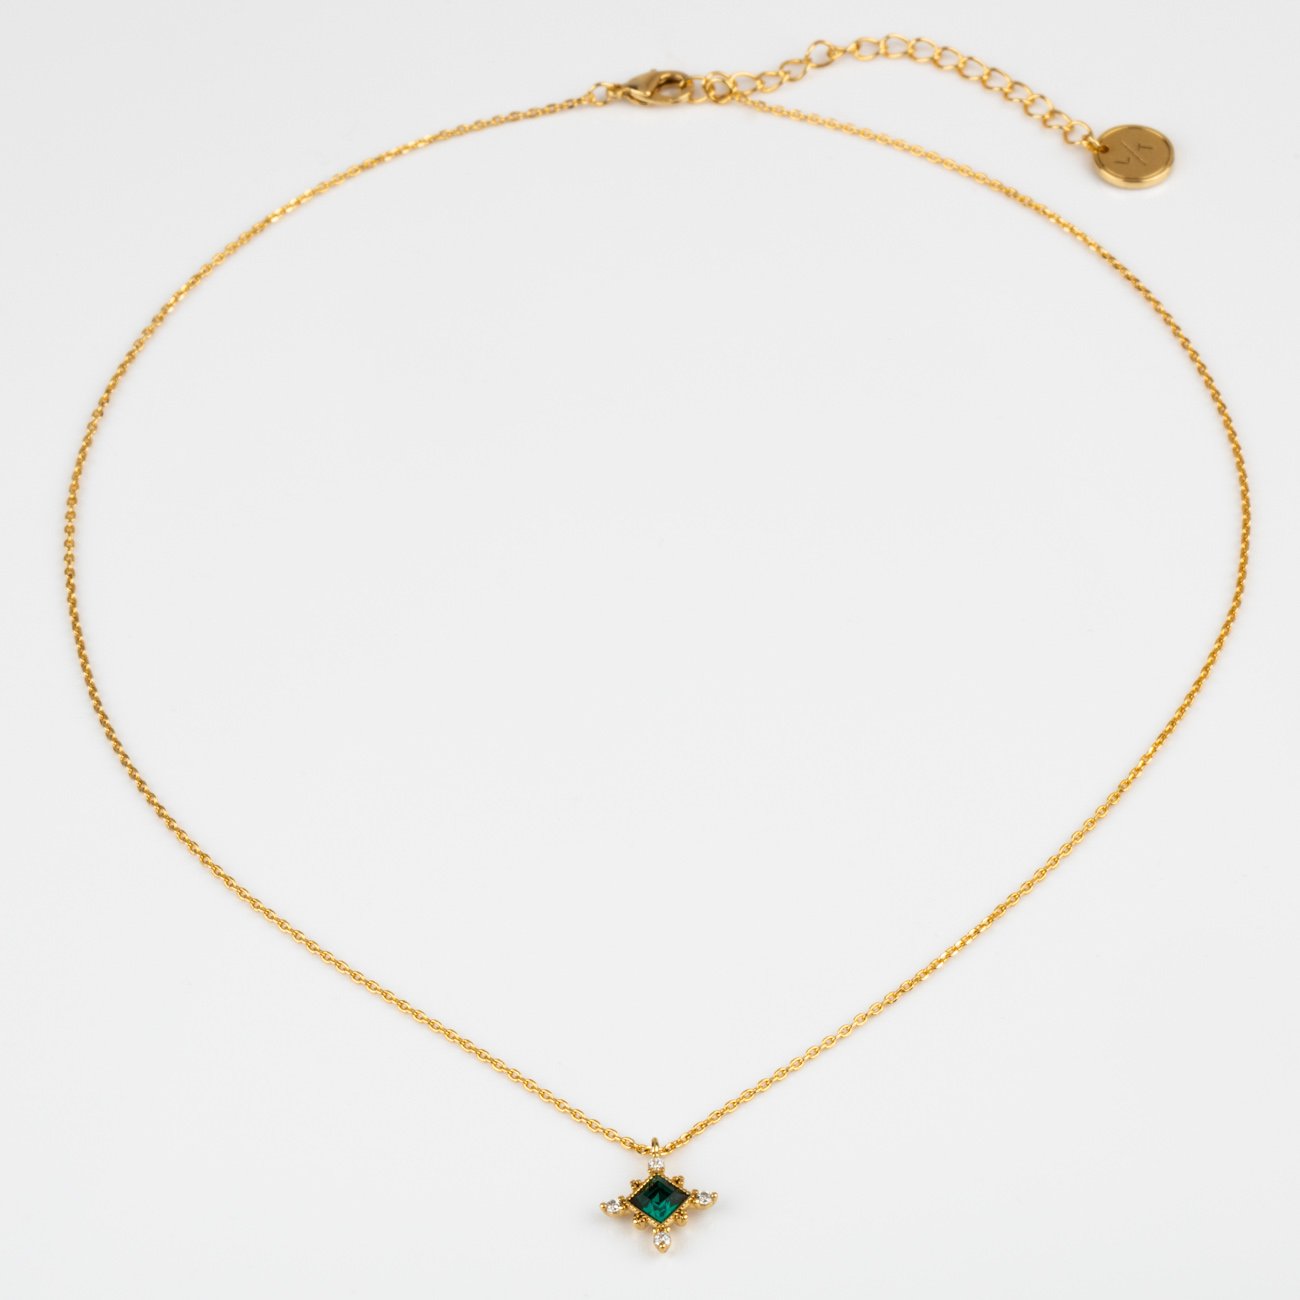 The Emerald Sierra Necklace from Lover's Tempo is vintage inspired and featured Emerald Swarovski crystal with a yellow gold chain.